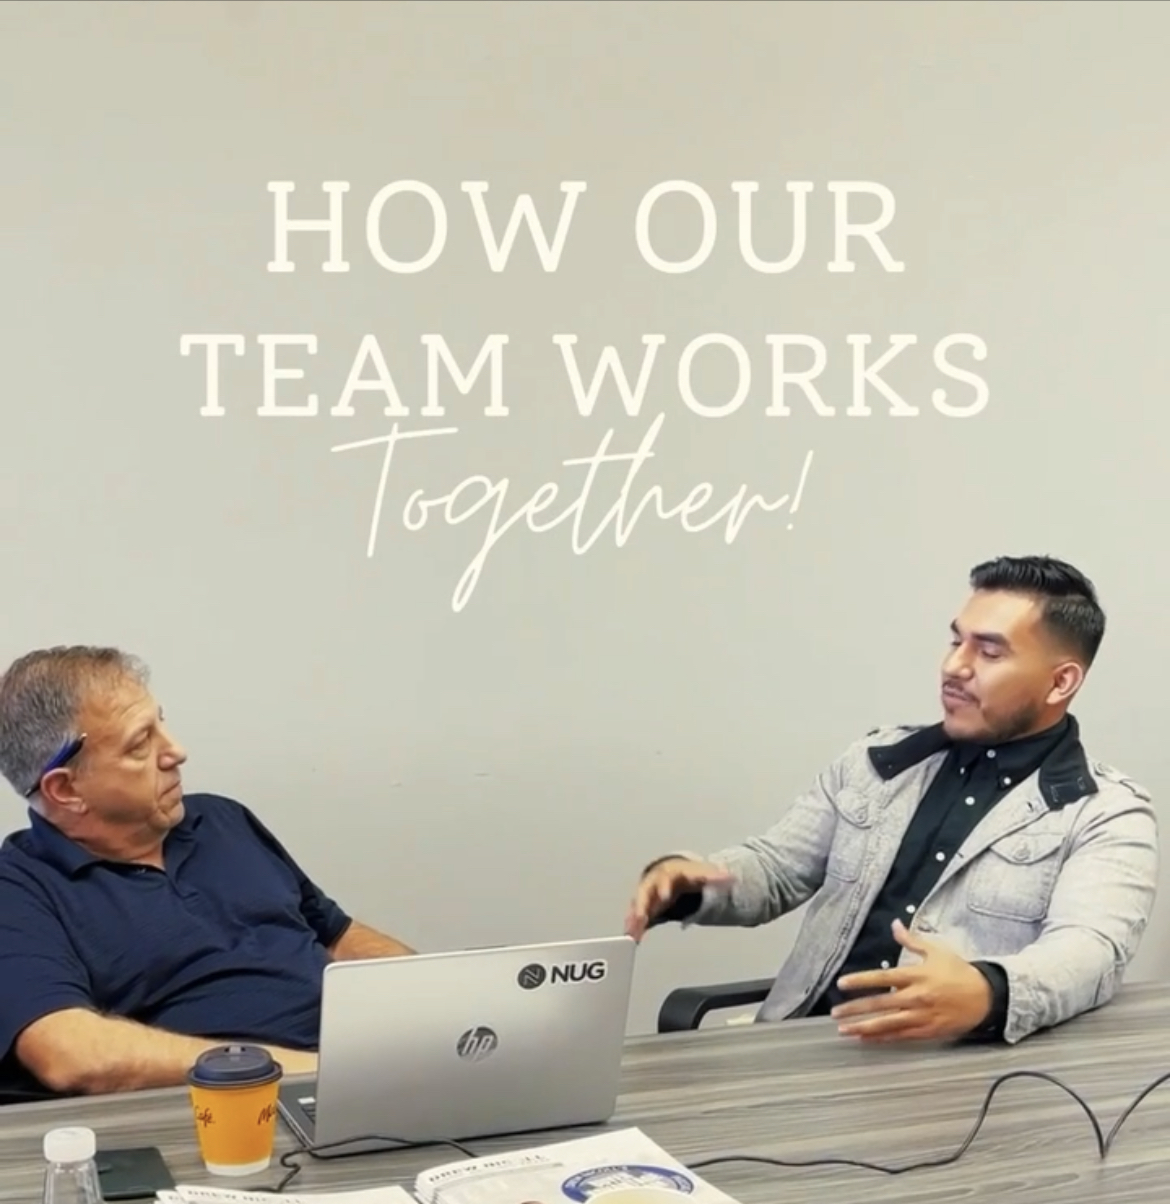 Watch our Home Selling Team learn and growth together